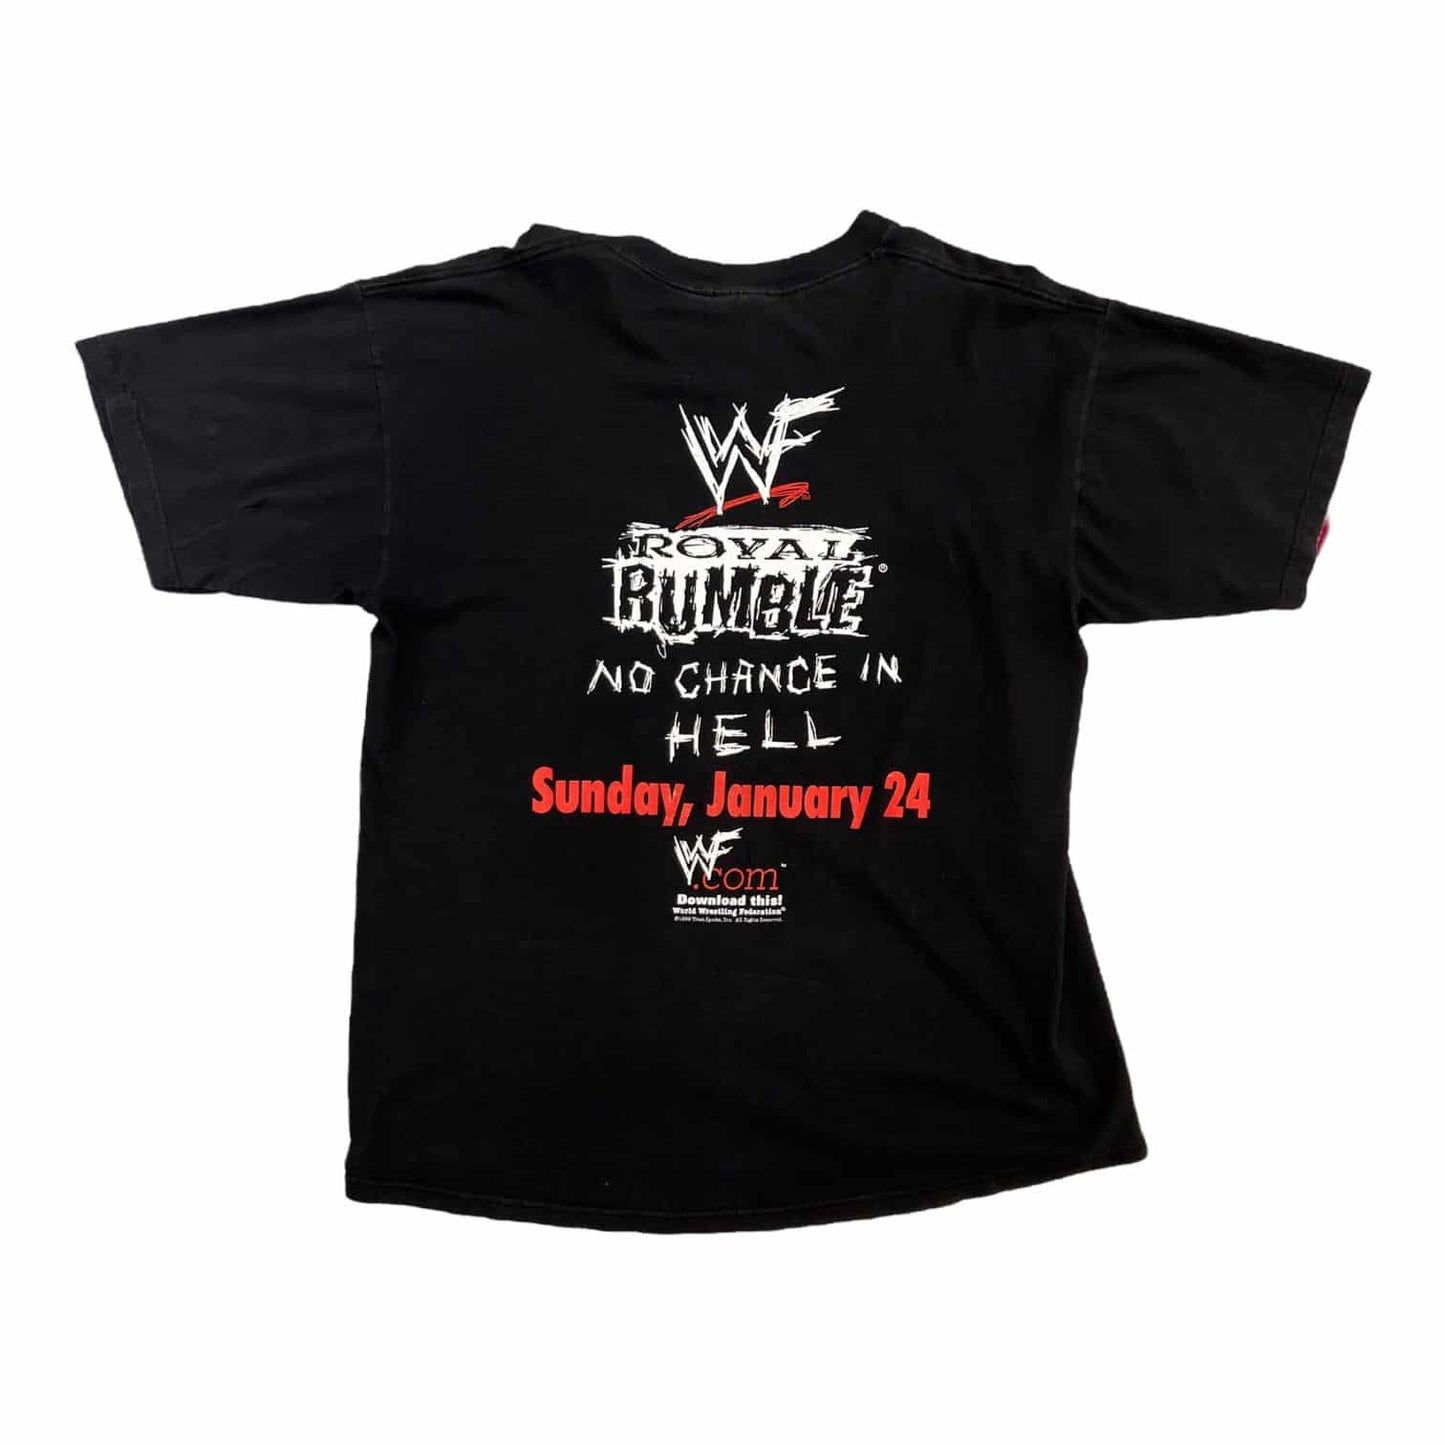 1999 WF Royal Rumble no chance in hell vintage tee